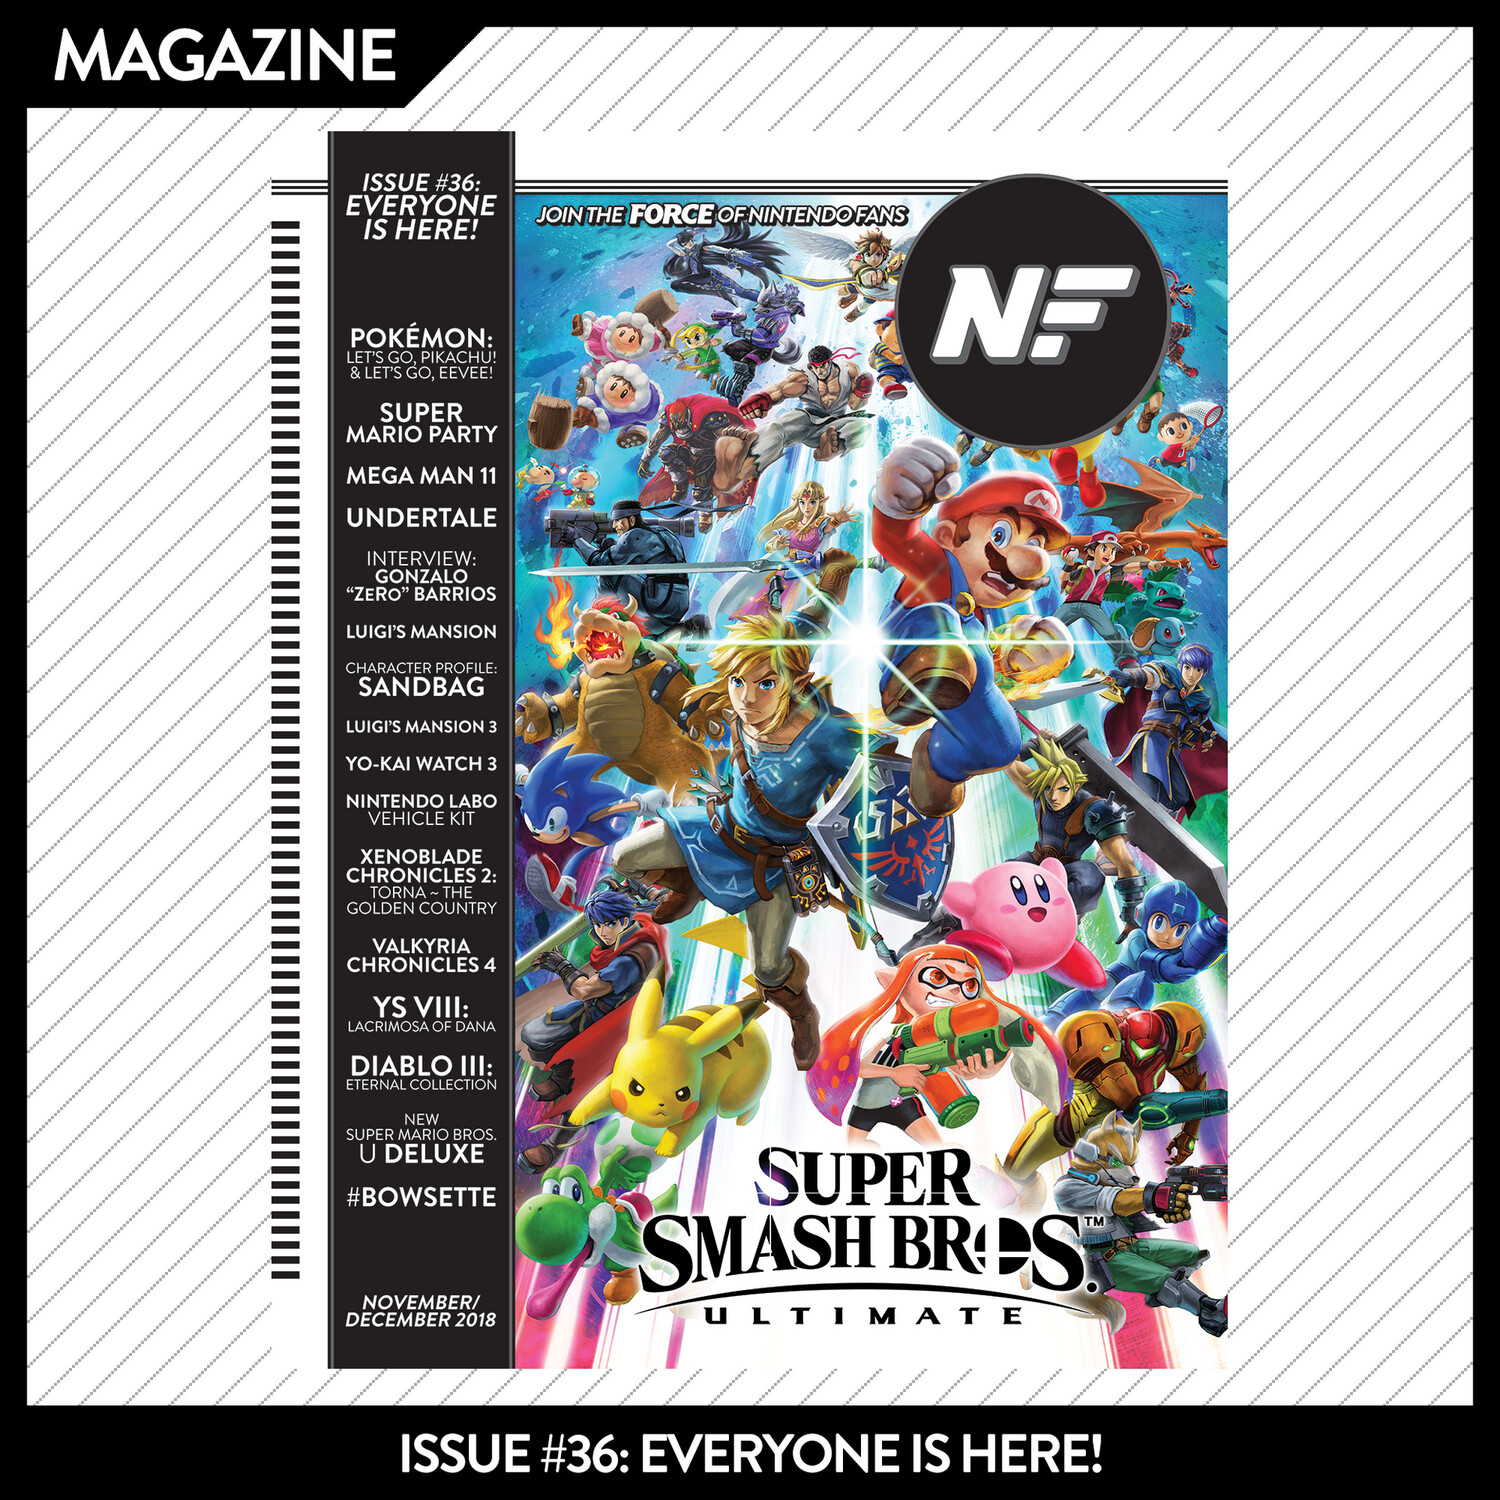 Issue #36: Everyone is Here! – November/December 2018